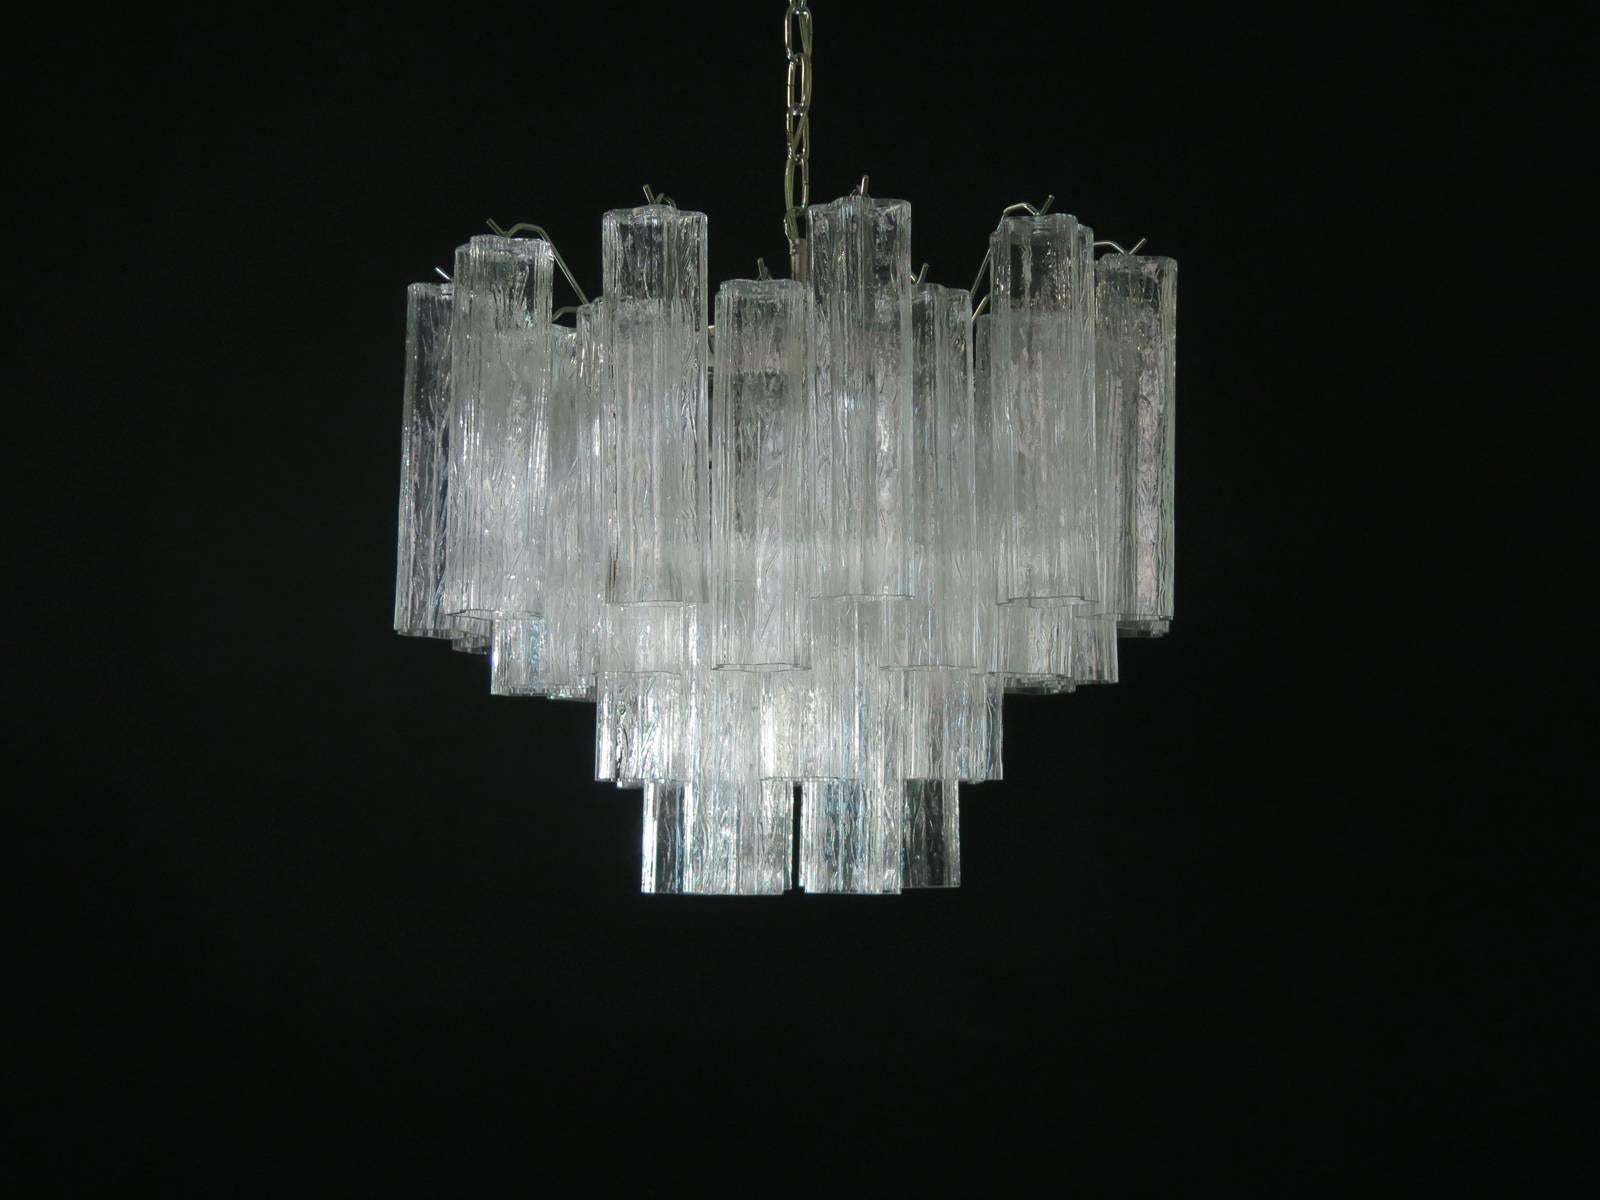 
Italian vintage chandelier in Murano glass and nickel-plated metal structure. The armor polished nickel supports 36 large clear glass tubes in a star shape.
Period:	late XX century
Dimensions: 45,30 inches (115 cm) height with chain; 19,70 inches